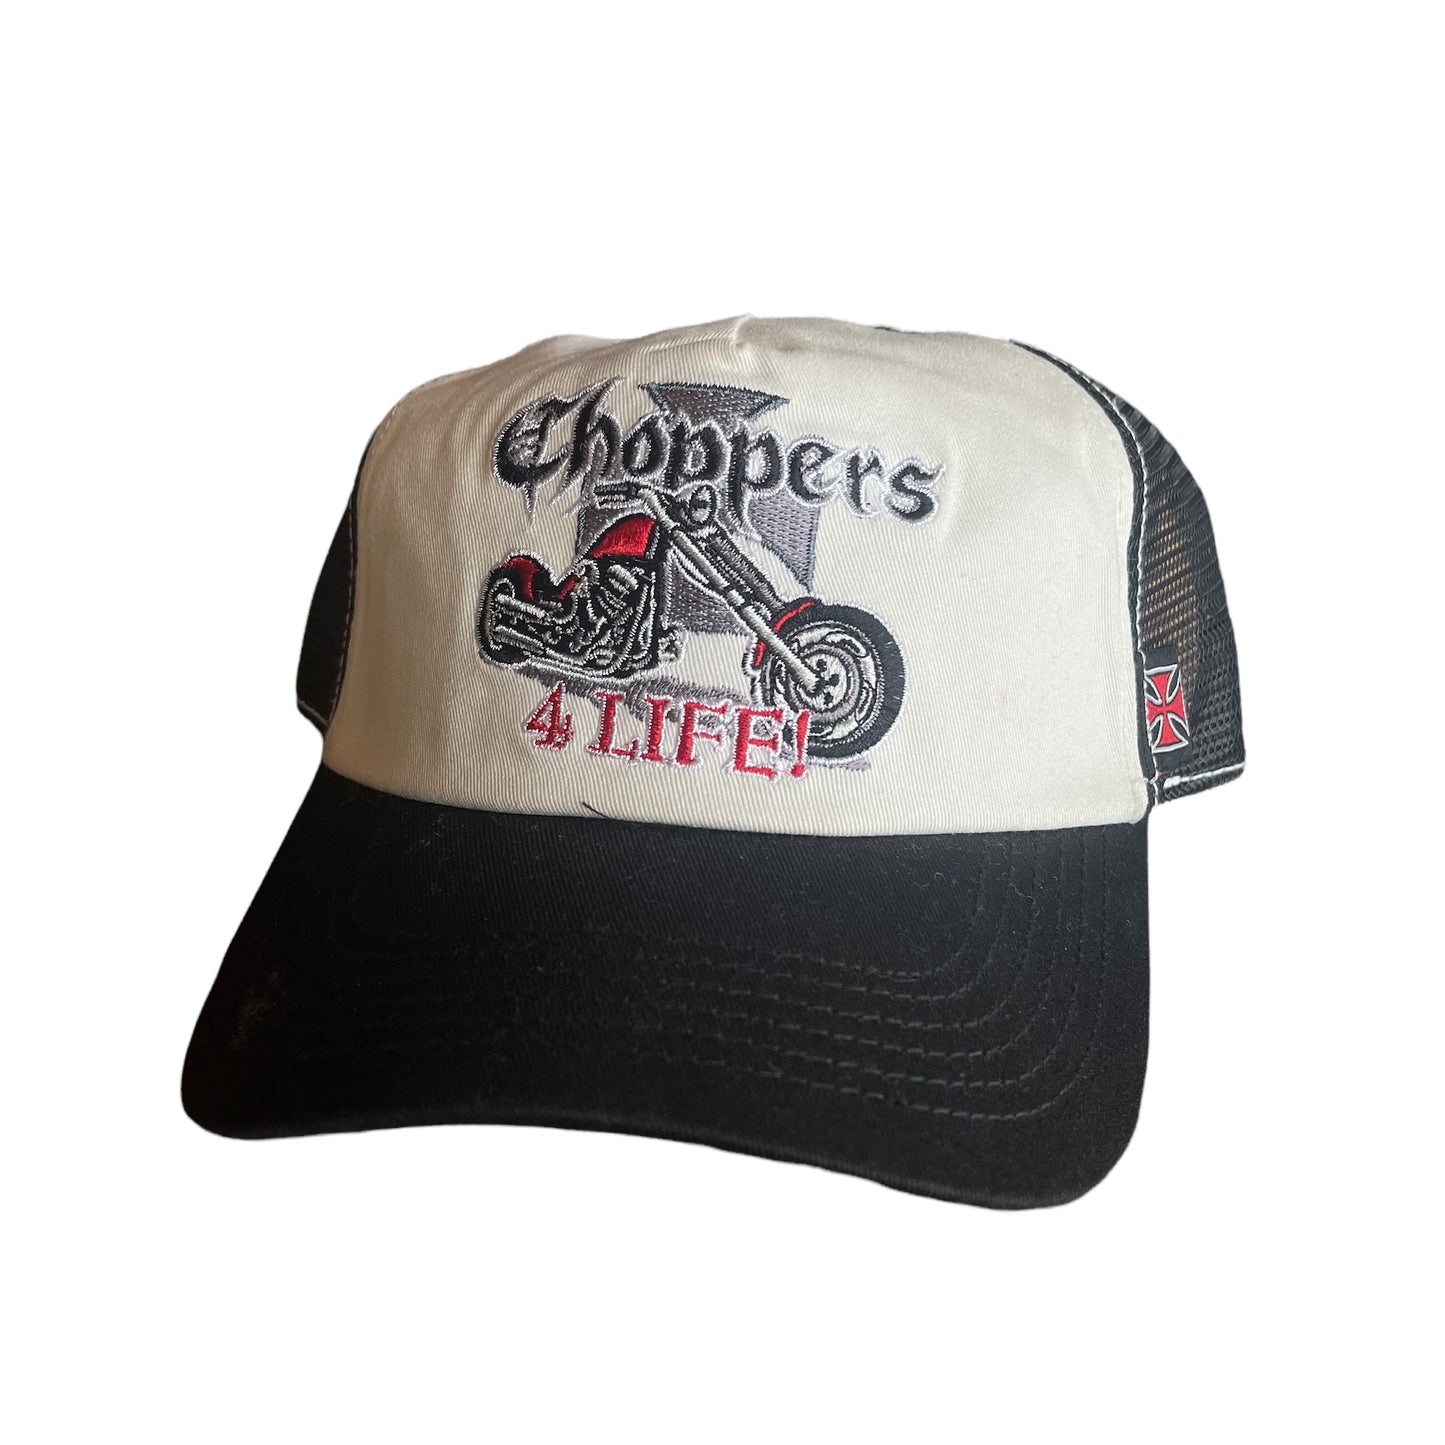 Vintage 90s Choppers 4 Life Trucker Snap Back